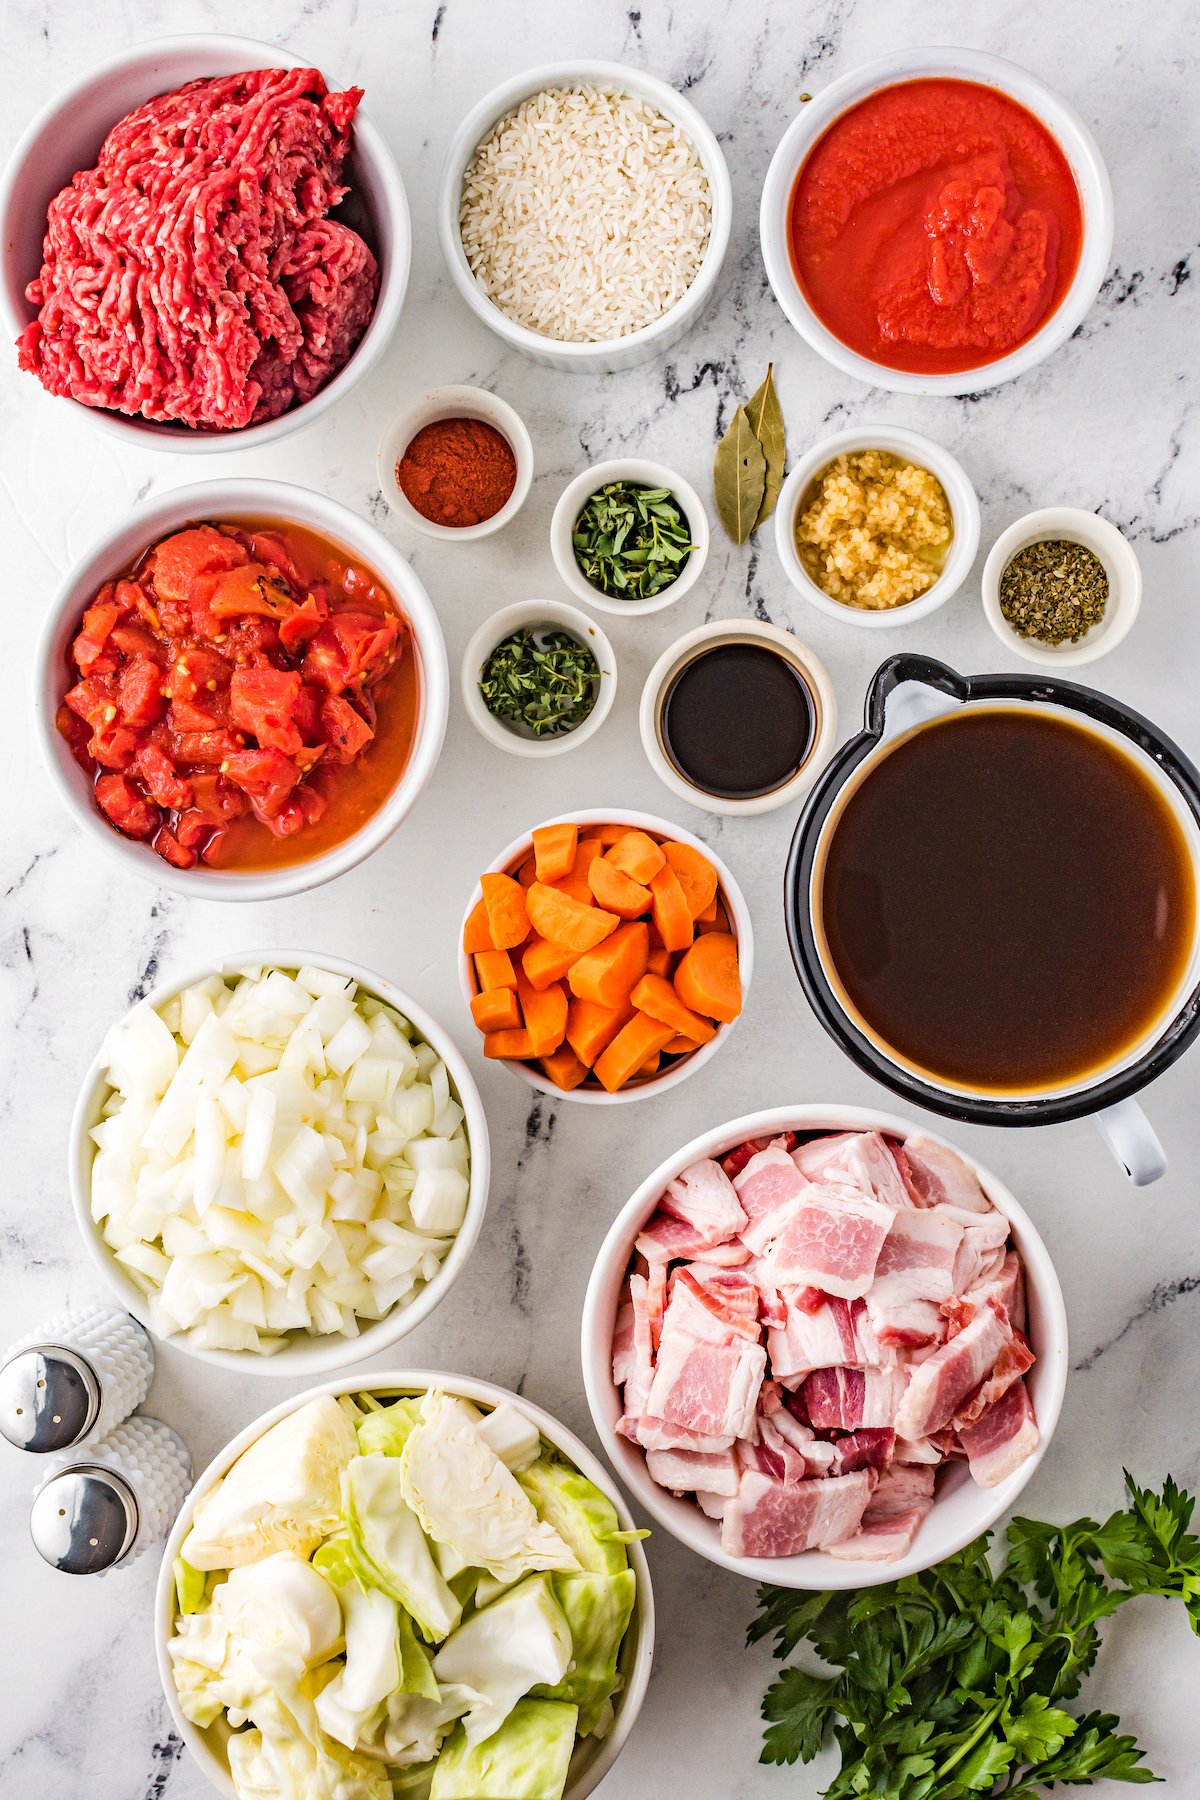 Clockwise from top: White rice, tomato sauce, garlic, herbs, bay leaves, Worcestershire sauce, carrots, beef broth, bacon, fresh parsley, chopped cabbage, salt and pepper, chopped onions, caned tomatoes, spices, ground beef.